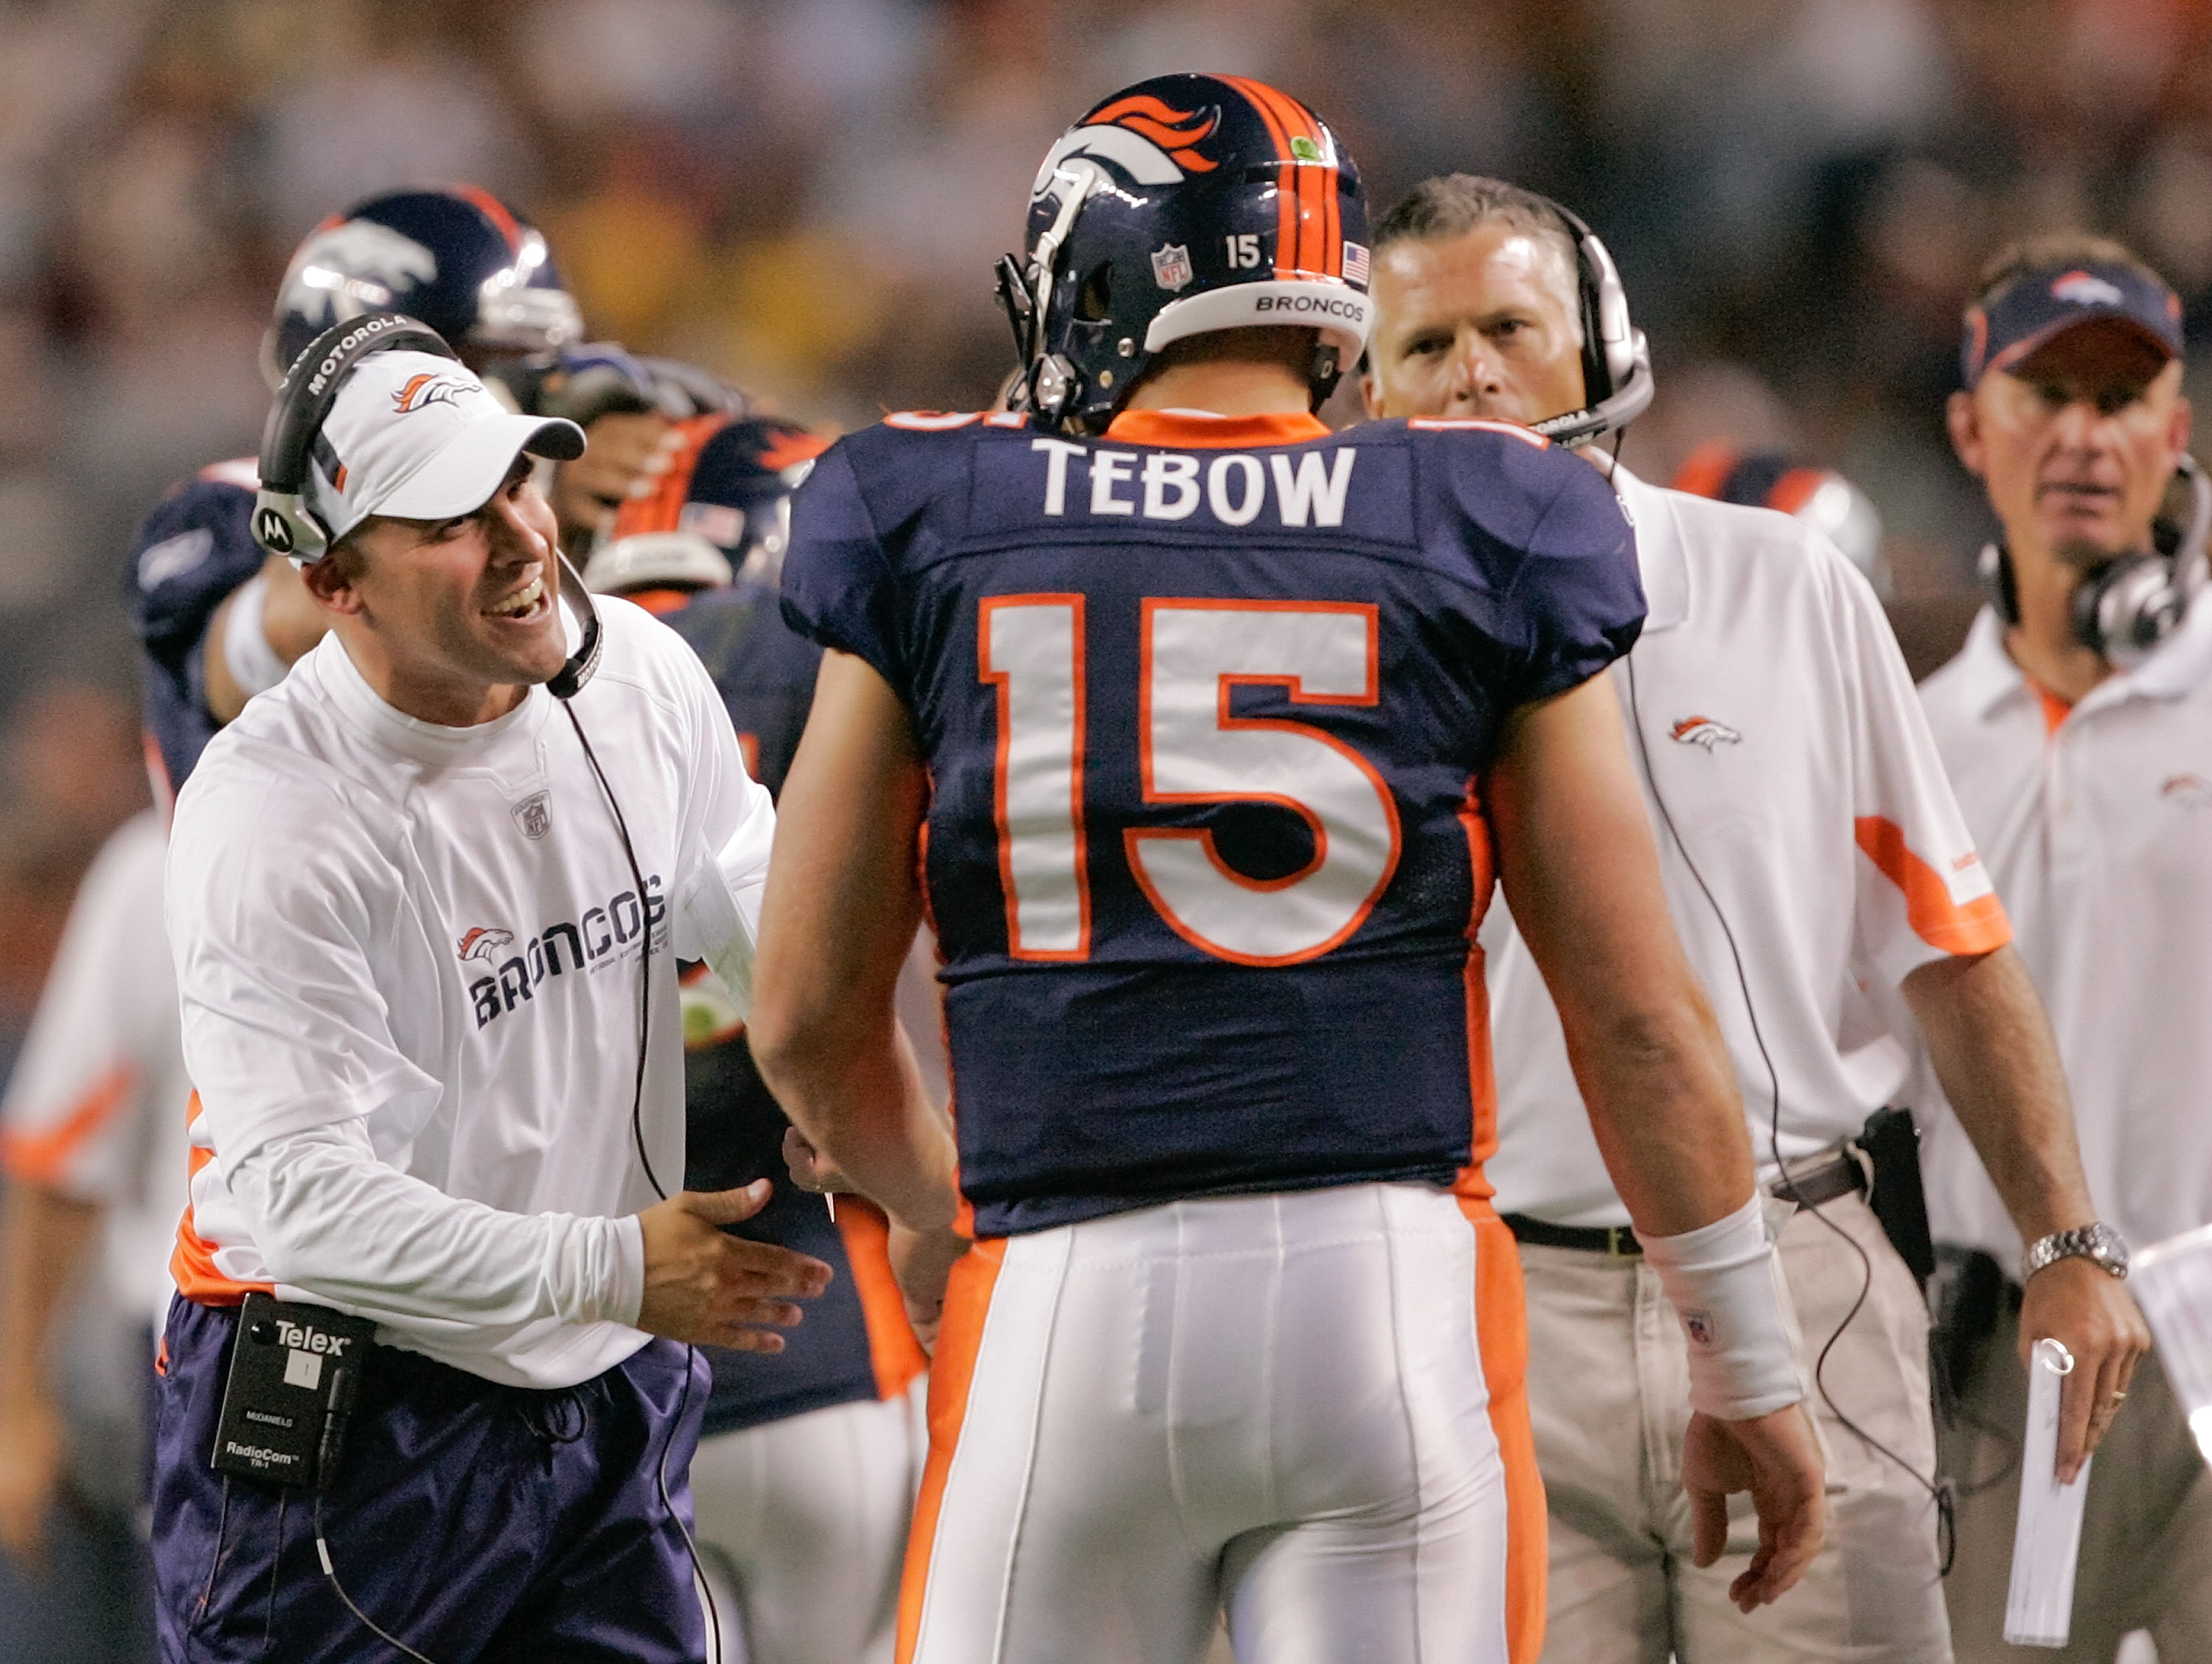 DENVER - AUGUST 29: Head coach Josh McDaniels of the Denver Broncos congratulates quarterback Tim Tebow #15 following his fourth quarter touchdown pass against the Pittsburgh Steelers at INVESCO Field at Mile High on August 29, 2010 in Denver, Colorado.